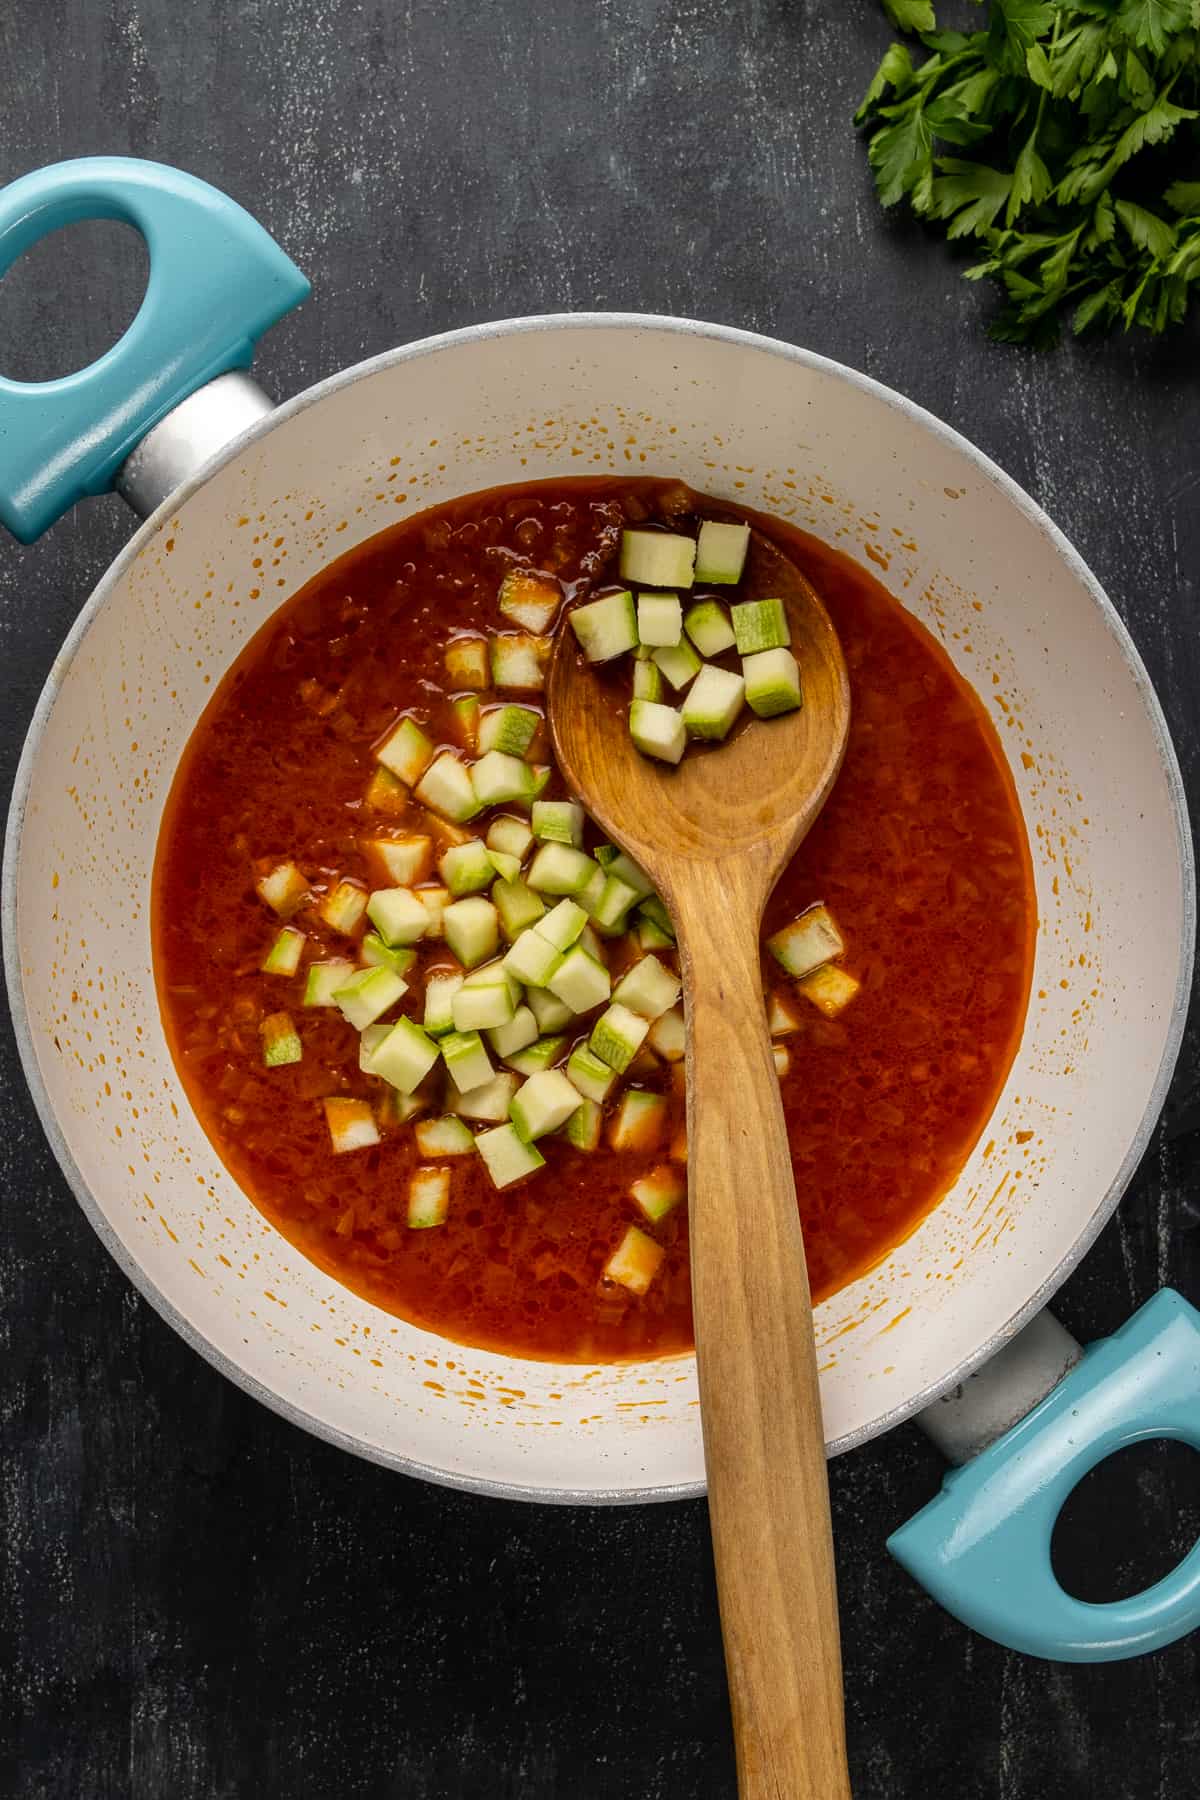 Diced zucchini cooking in a tomato sauce in a pan and a wooden spoon in it.